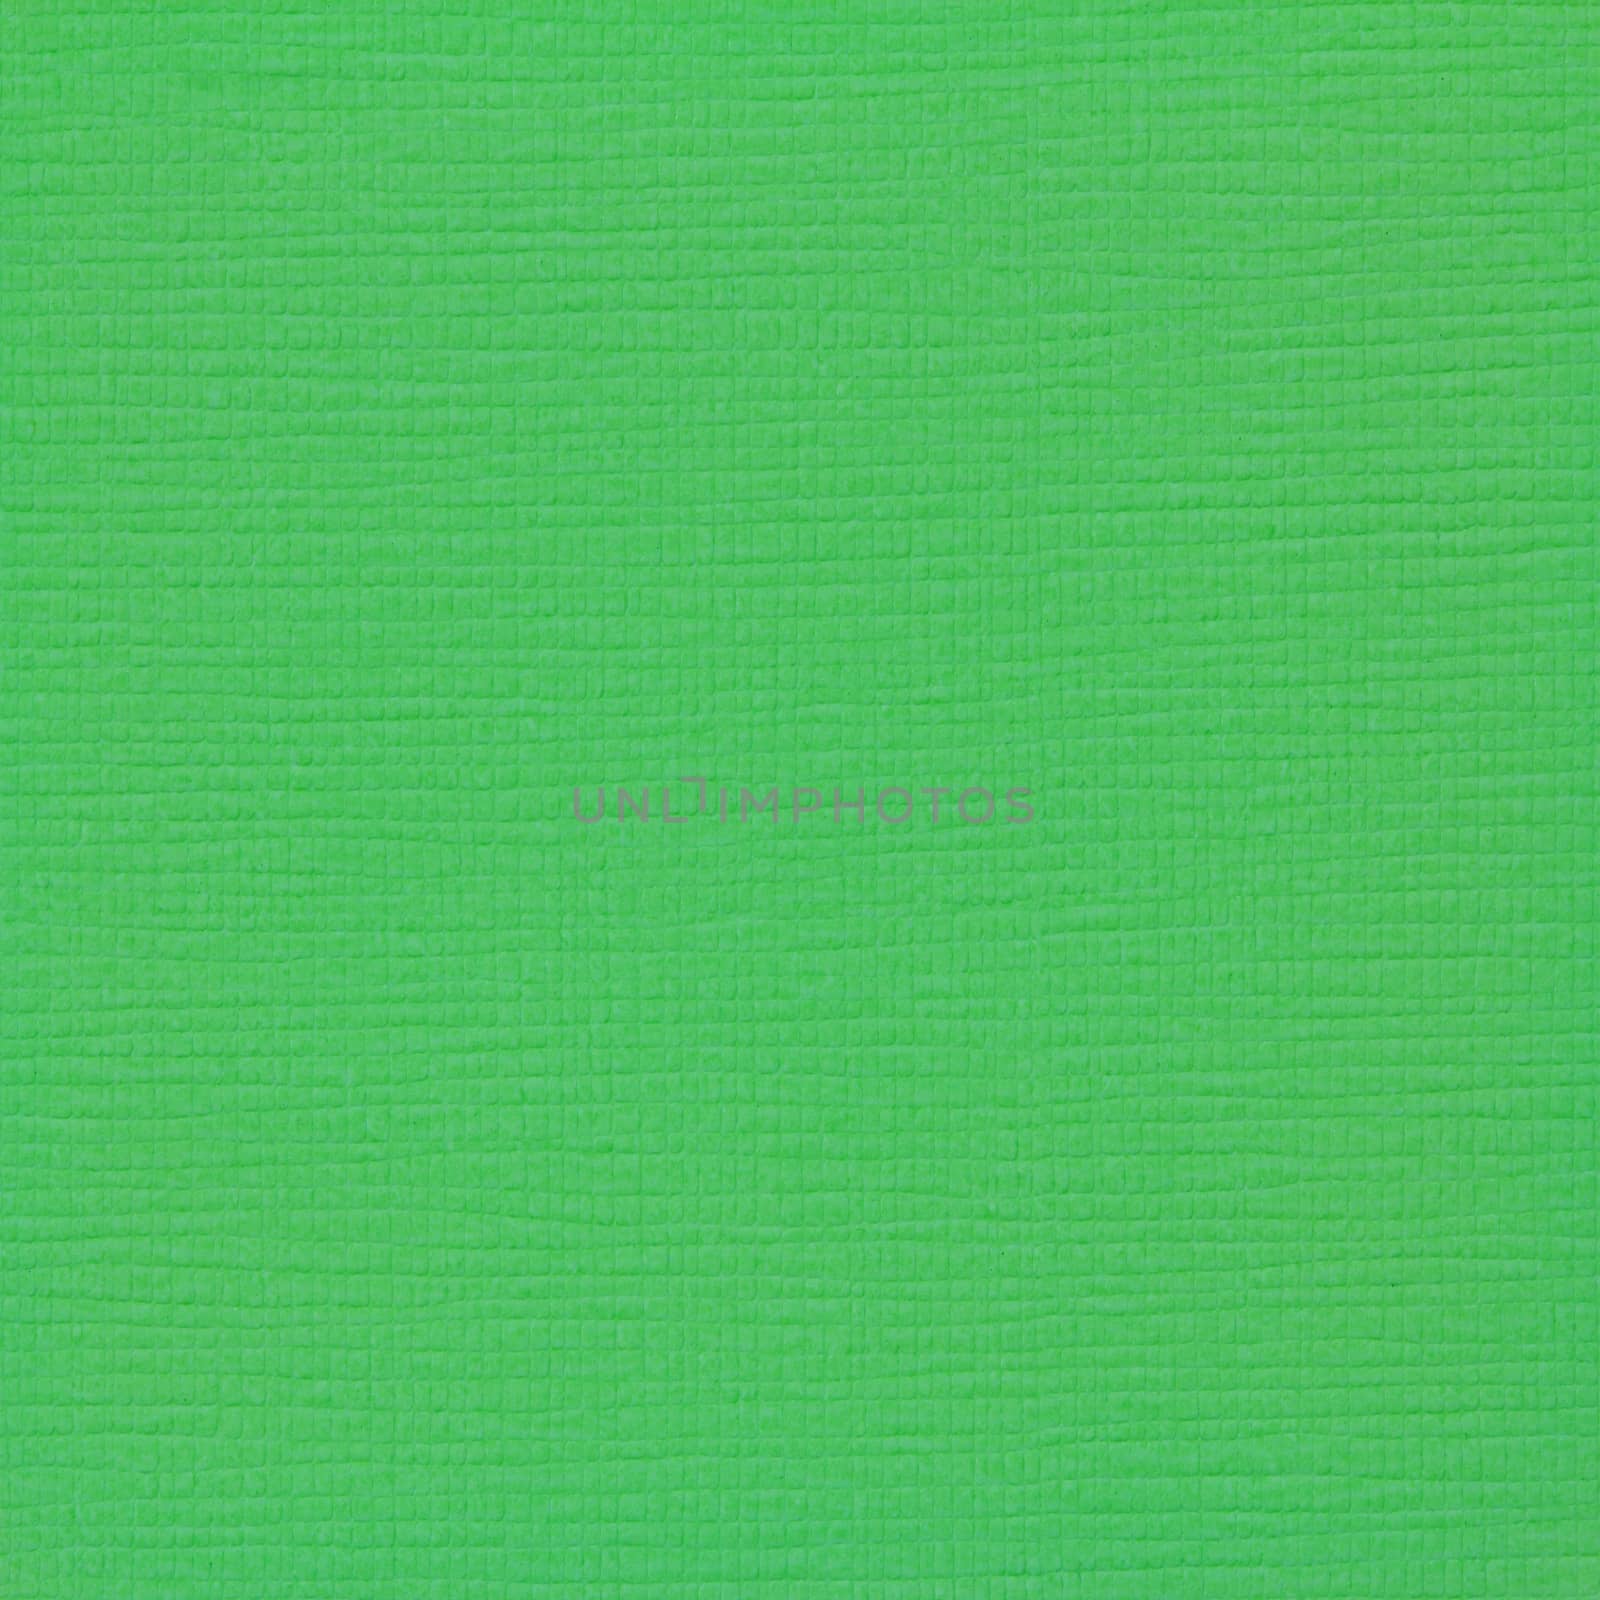 Green paper texture for background 